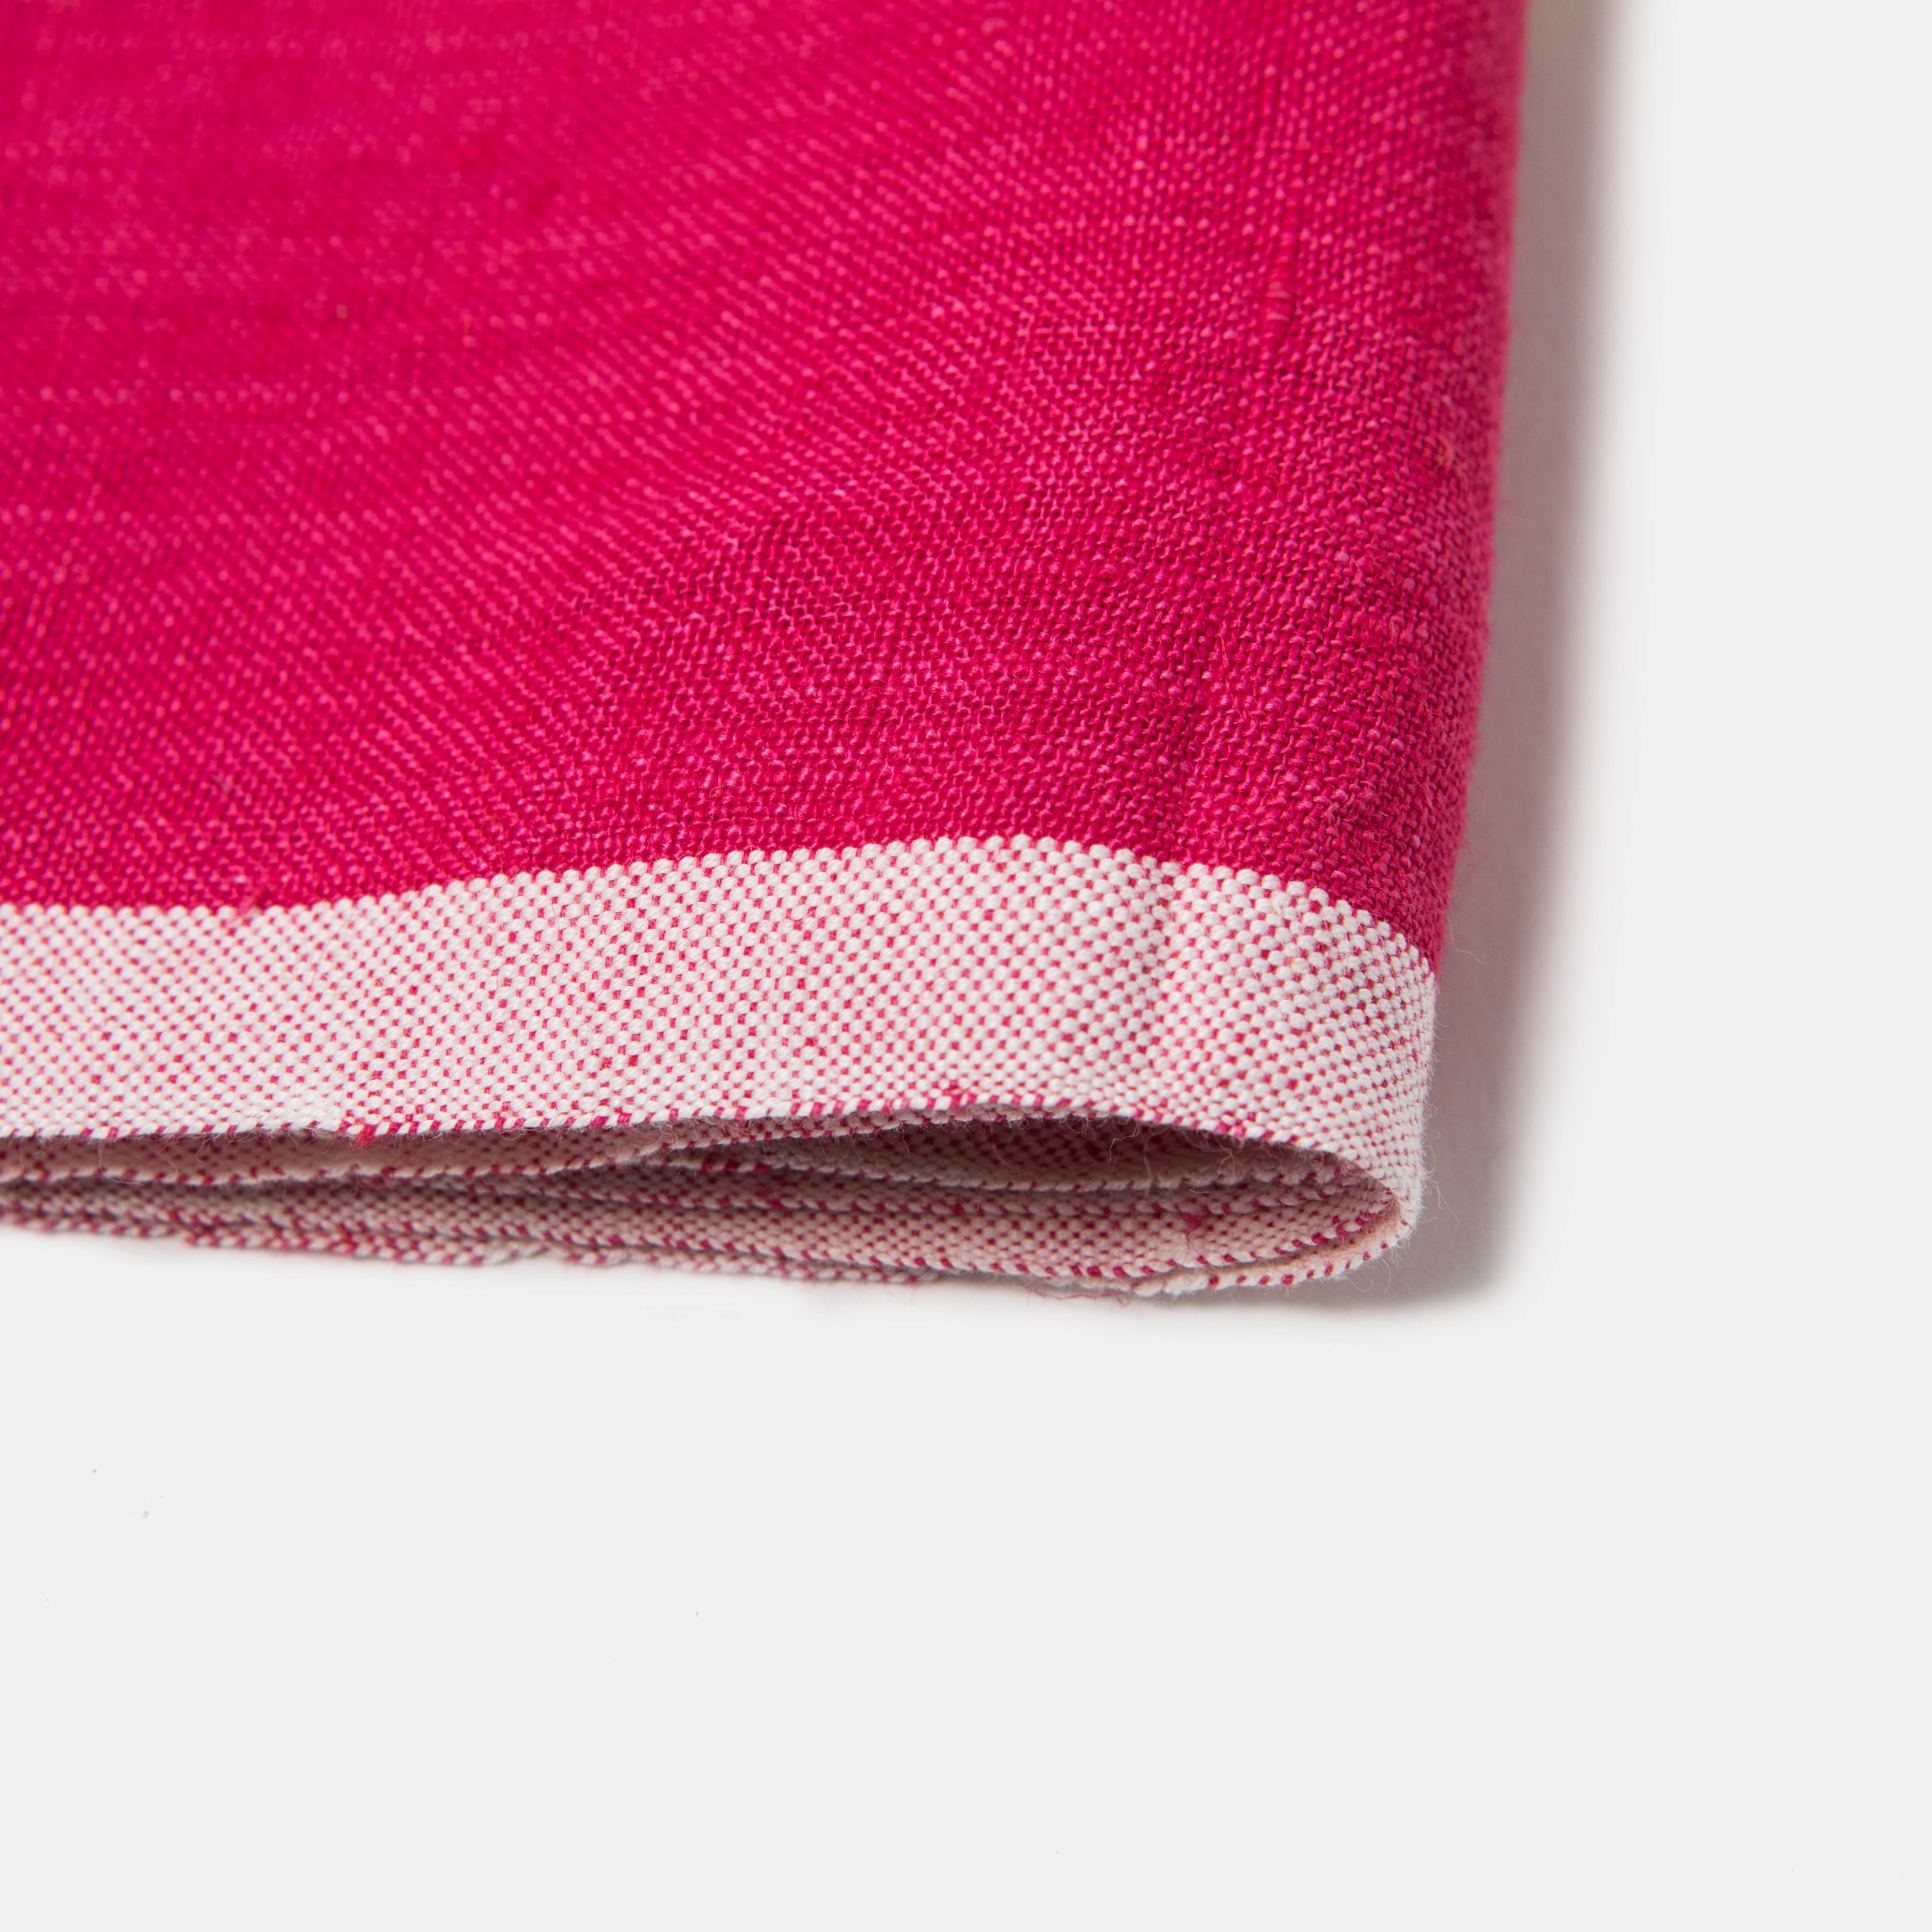 Laundered Linen Pink & Lime Towels 20x30 - Set of 2